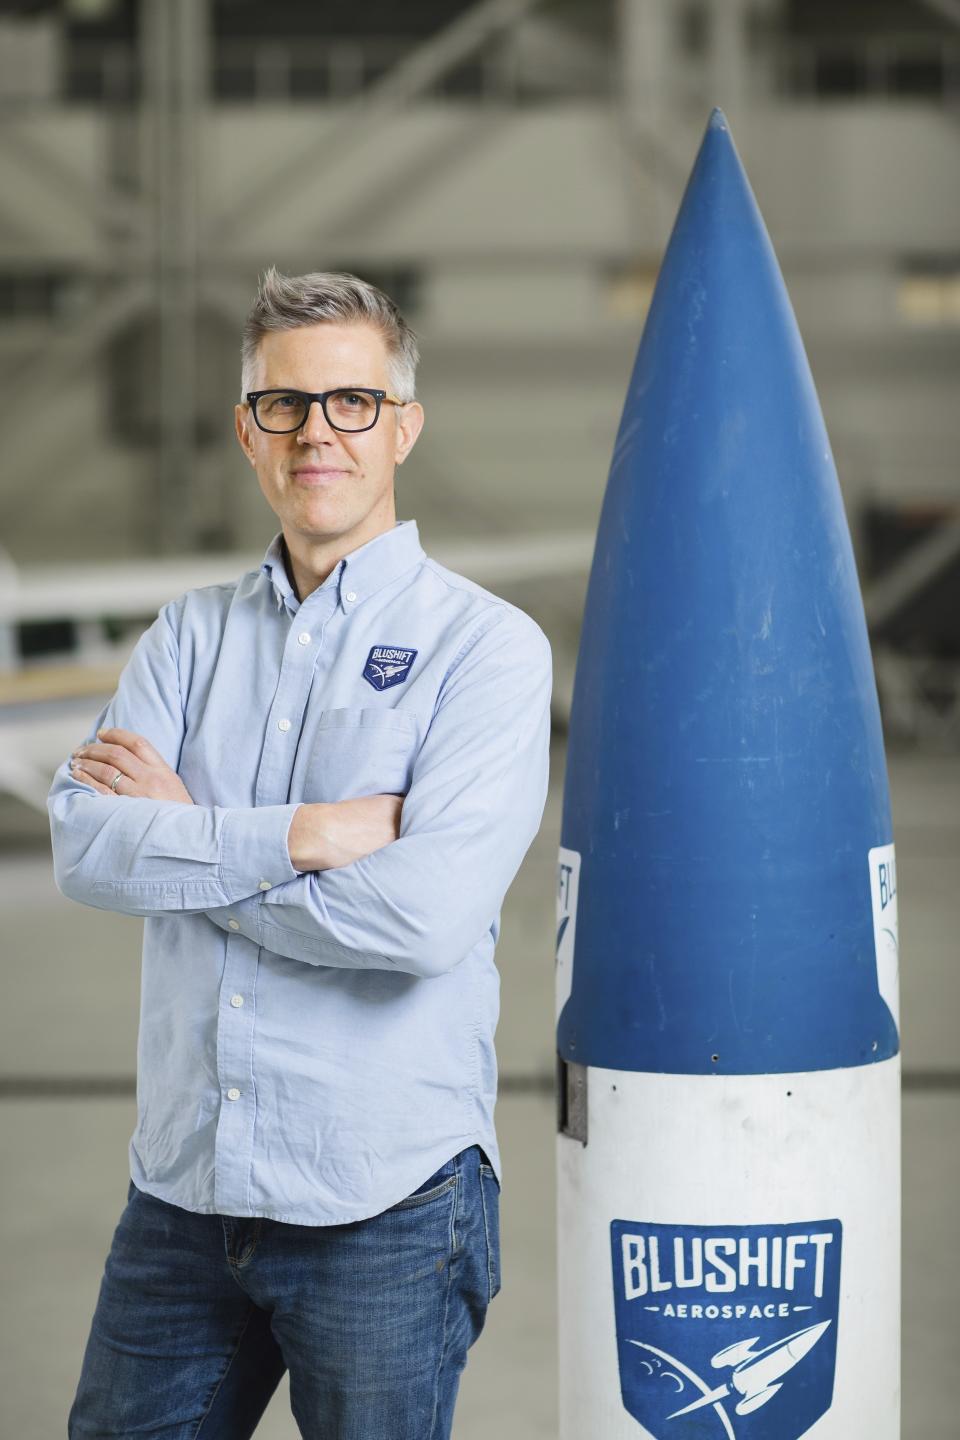 Sascha Deri, CEO and Founder of bluShift Aerospace, stands with Stardust 1.0 commercial rocket, April 2021 at bluShift headquarters in Brunswick, Maine. The company hopes to begin commercial launches of small satellites next year. (Lindsay Becker/bluShift Aerospace via AP)